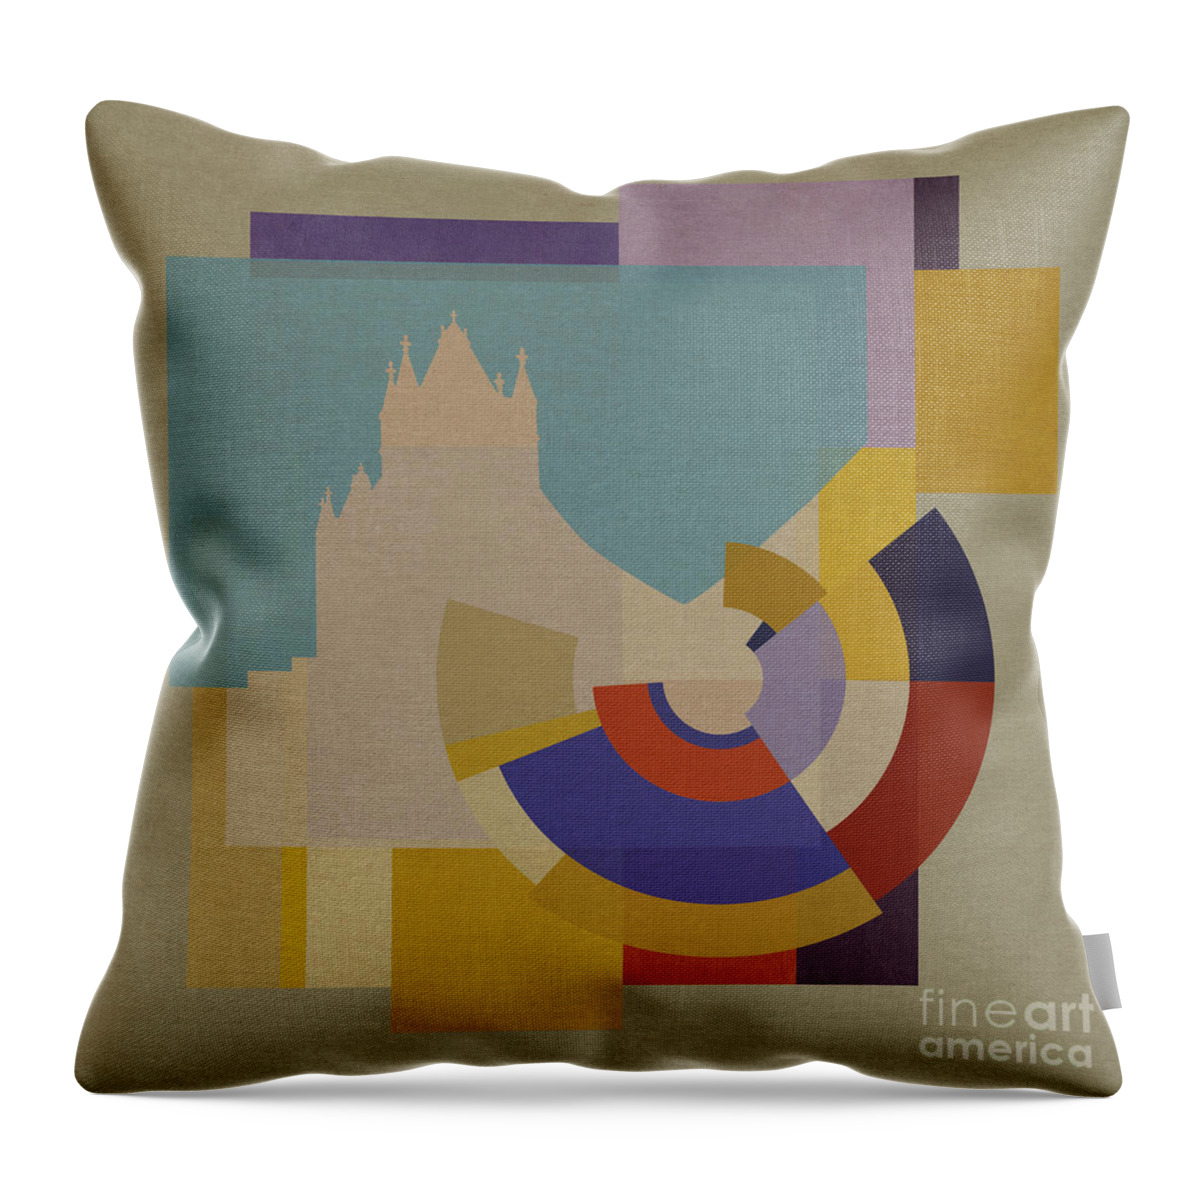 London Throw Pillow featuring the mixed media Capital Square - Tower Bridge by BFA Prints